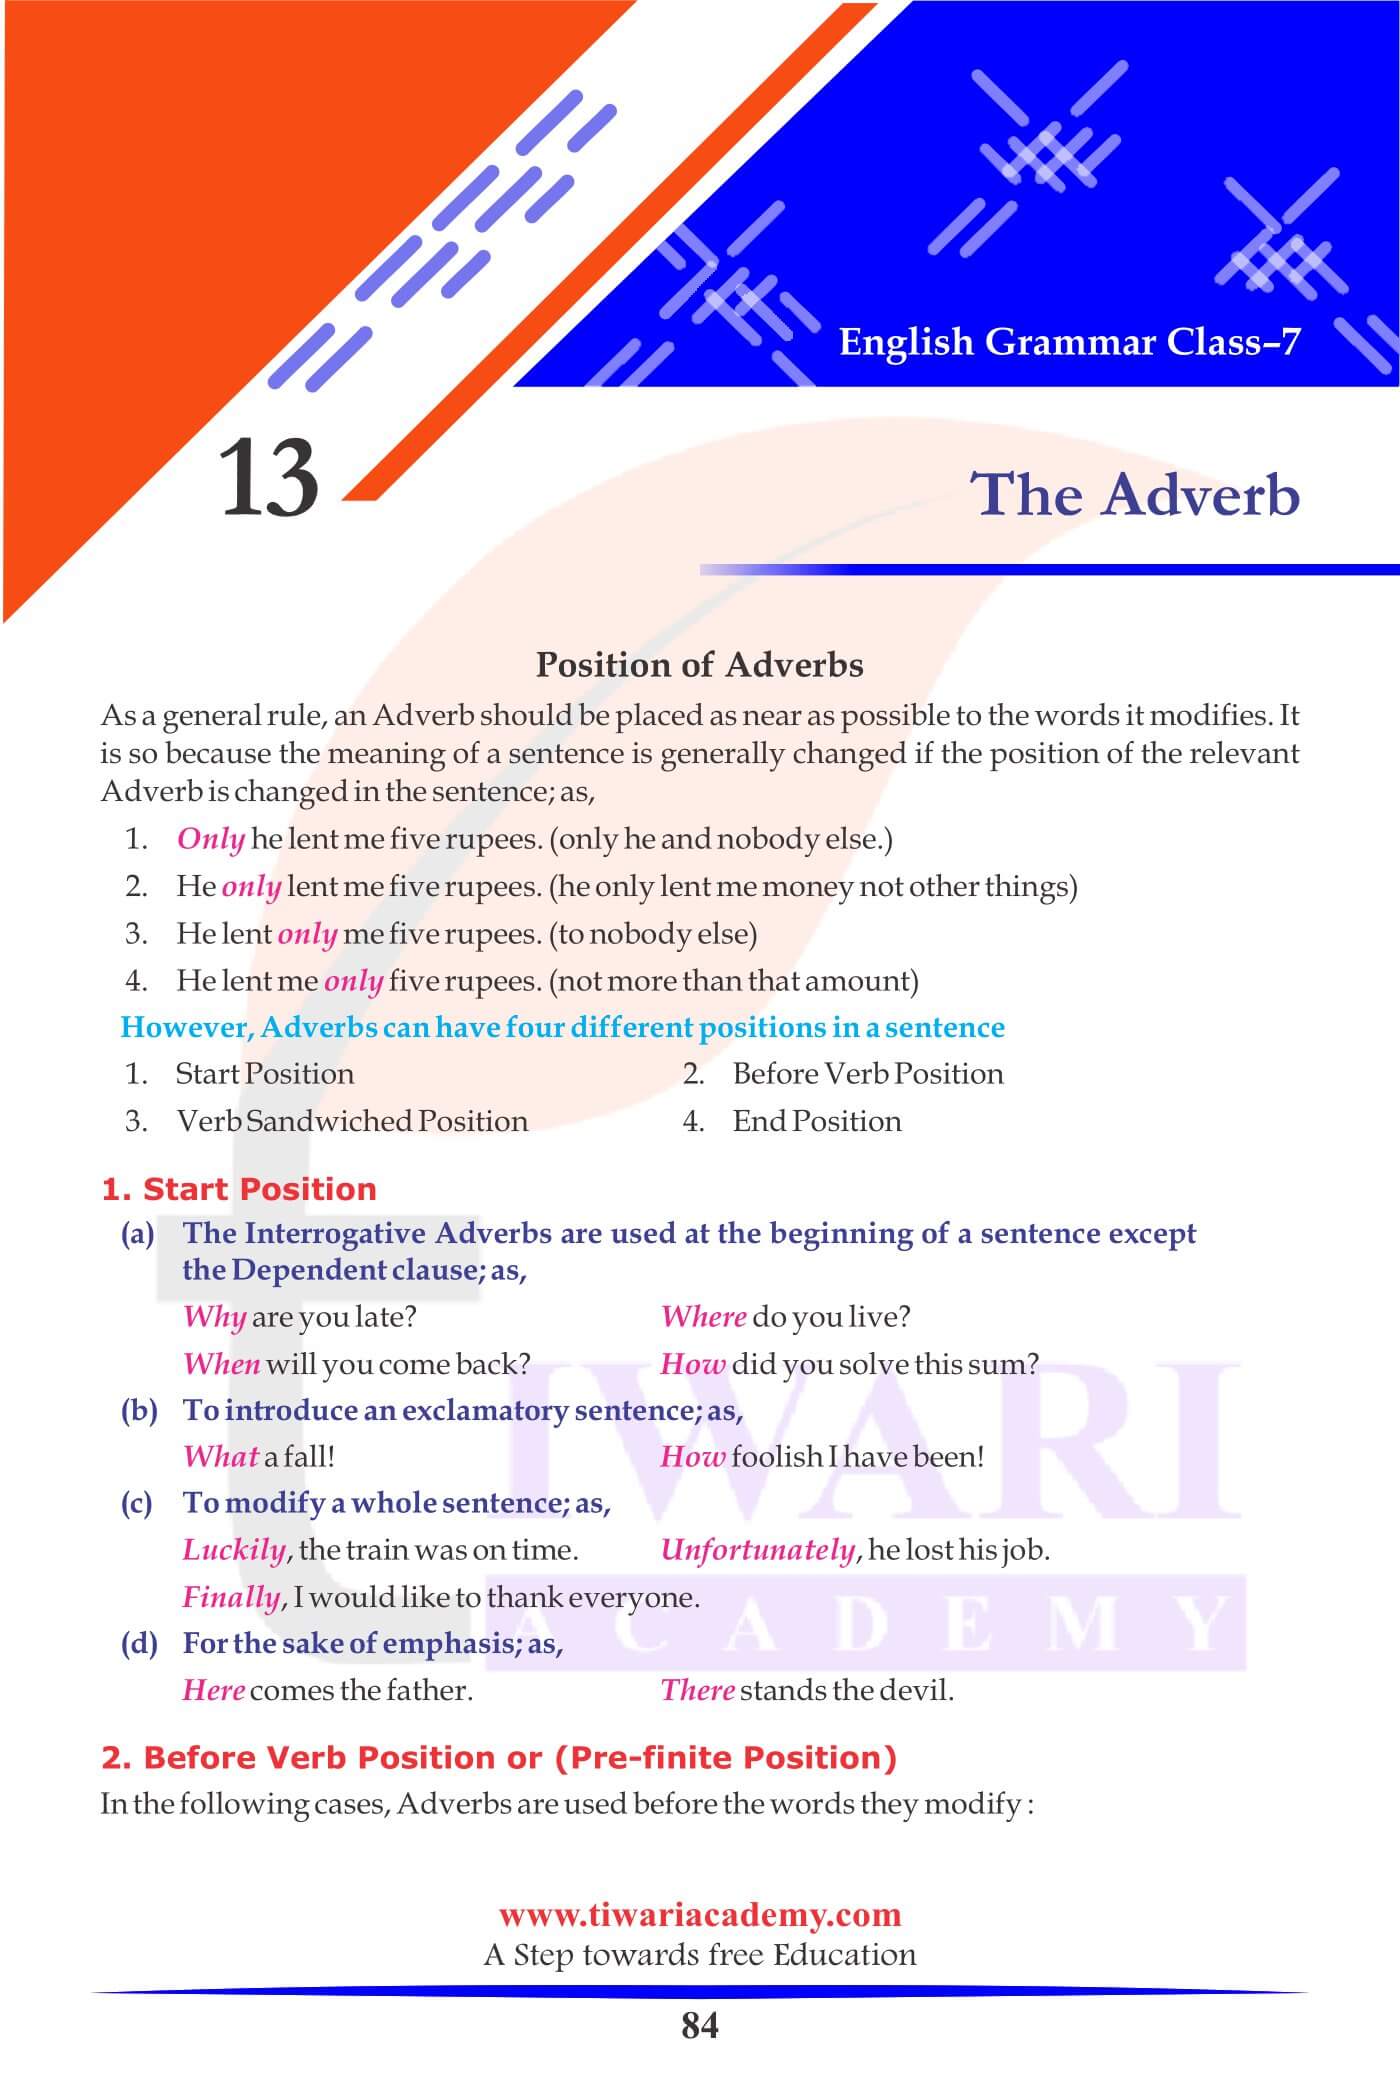 Class 7 English Grammar Chapter 13 The Adverb